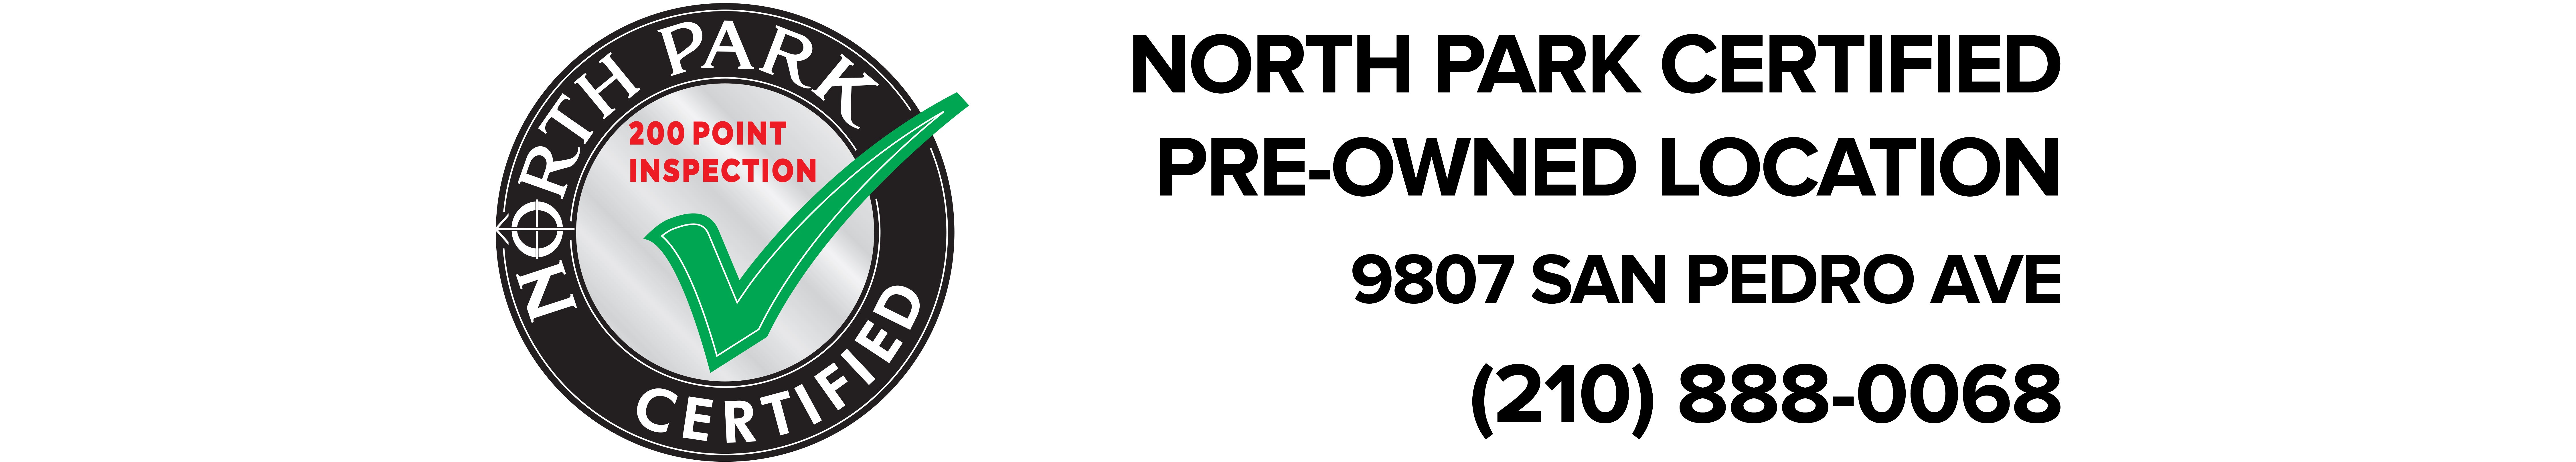 North Park Lincoln Certified Pre-Owned Location